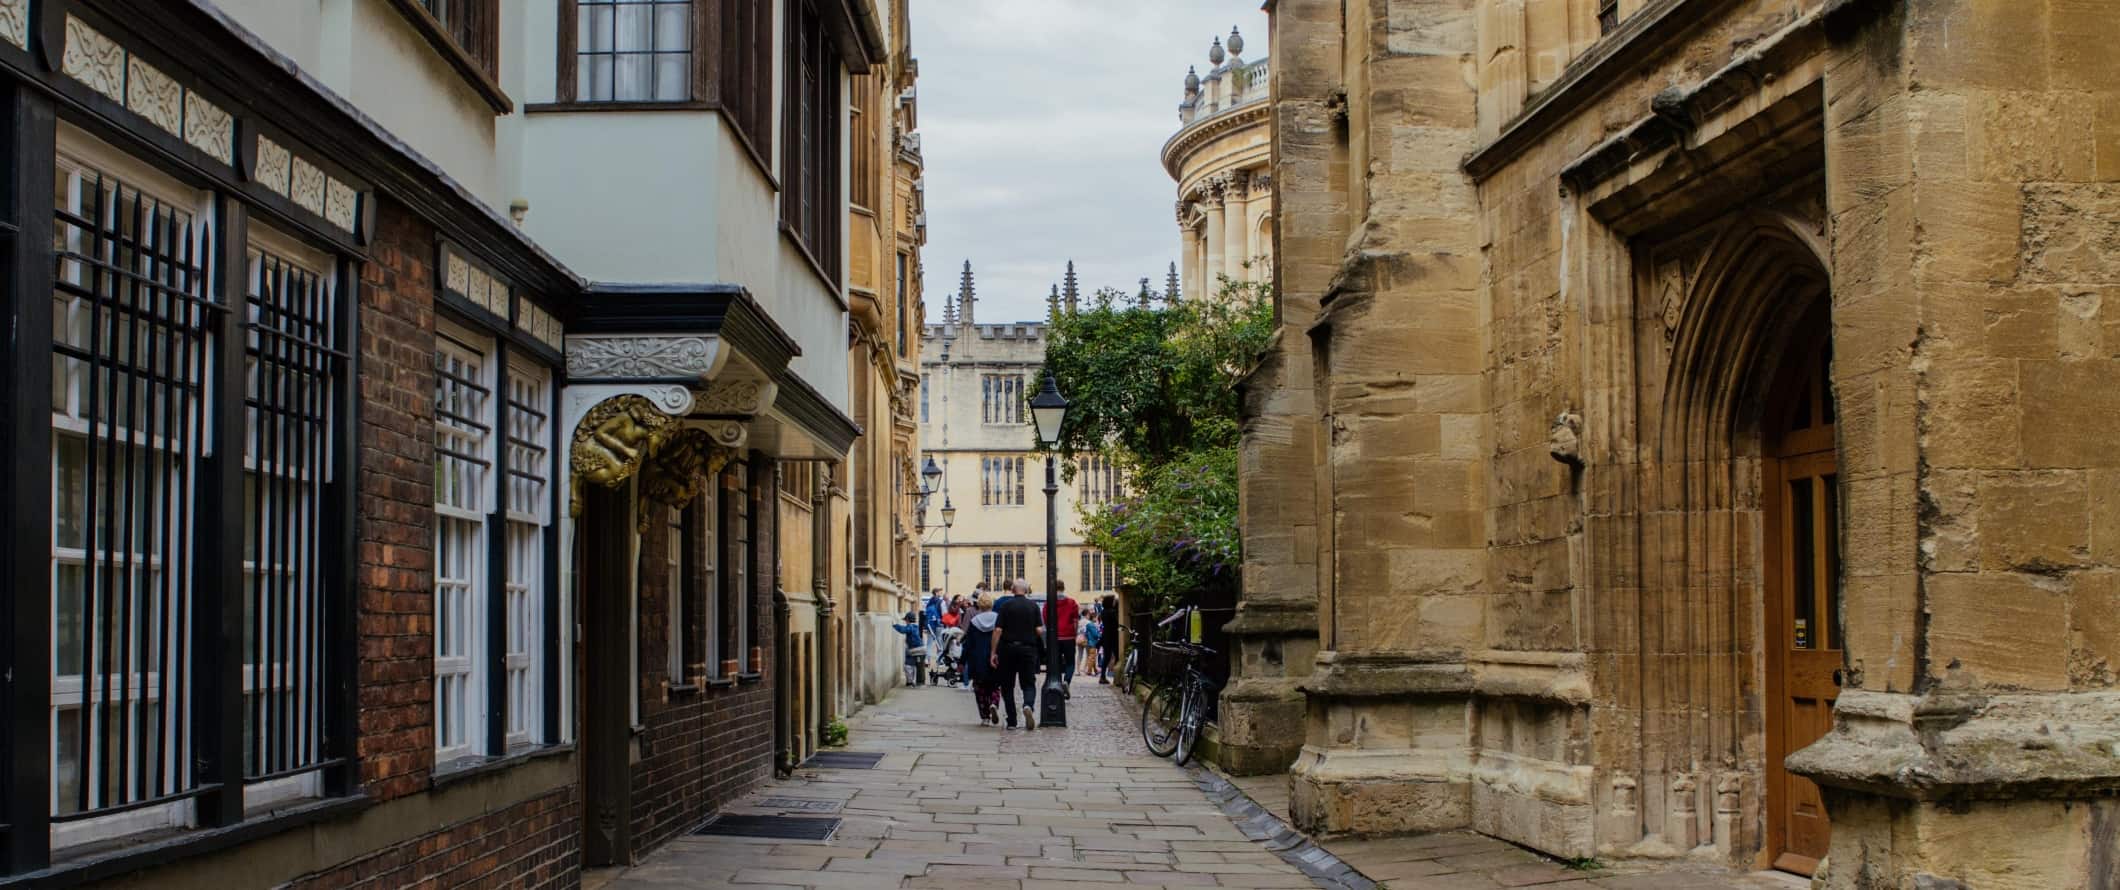 People walking down one of the historic, flagstone-lined lanes at the University of Oxford in the town of Oxford, England